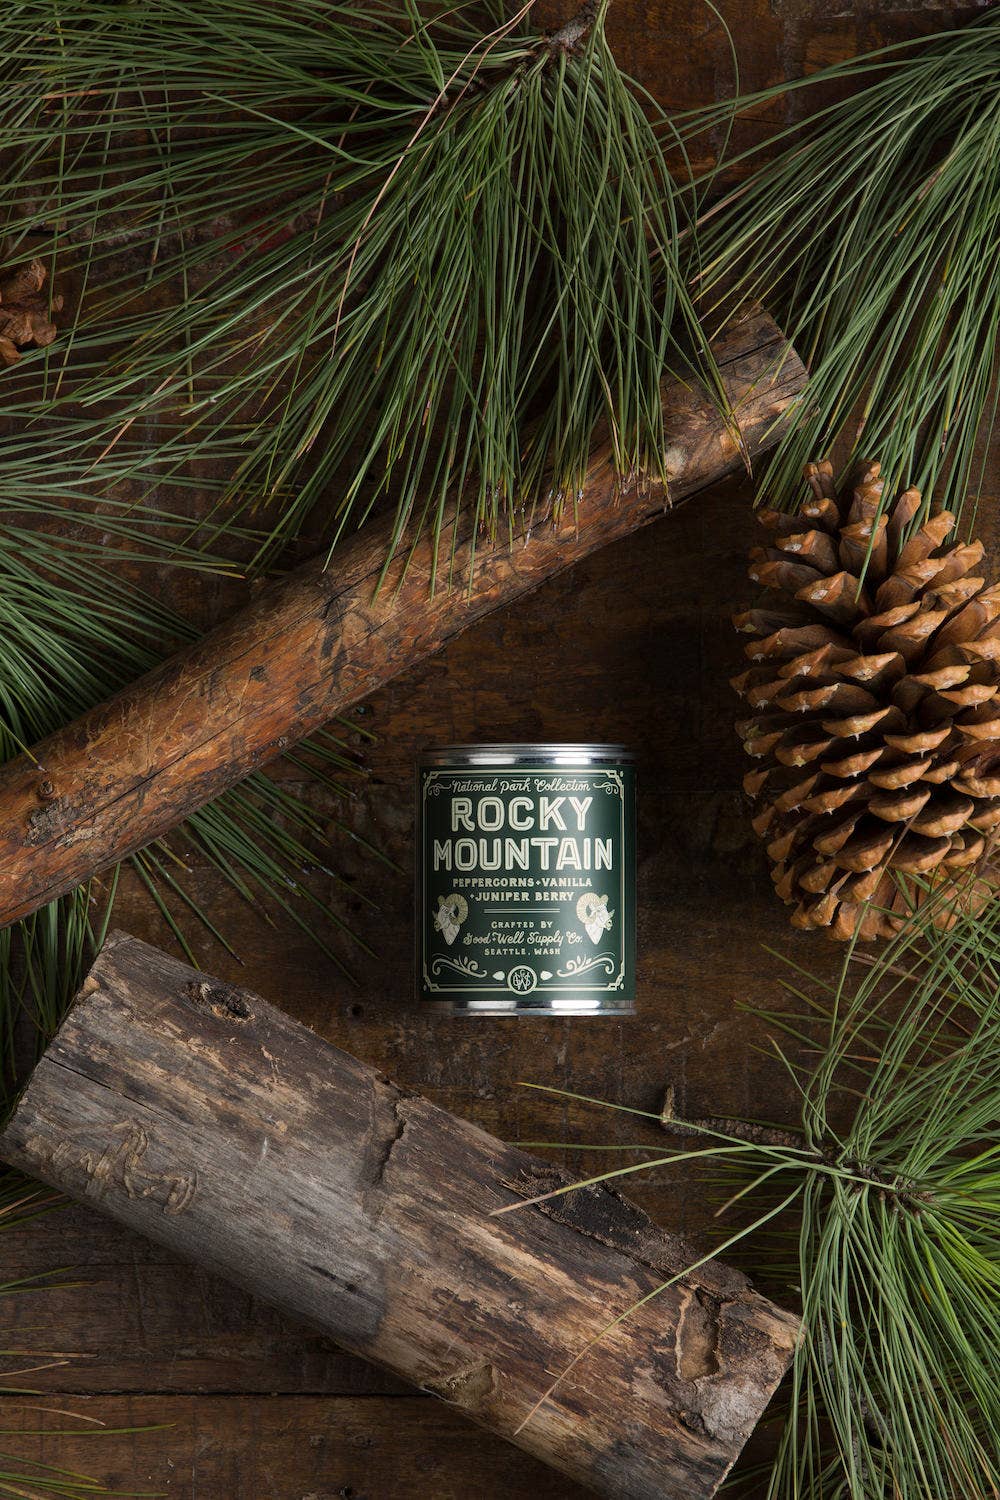 Good & Well Supply Co. - Rocky Mountain National Park Candle